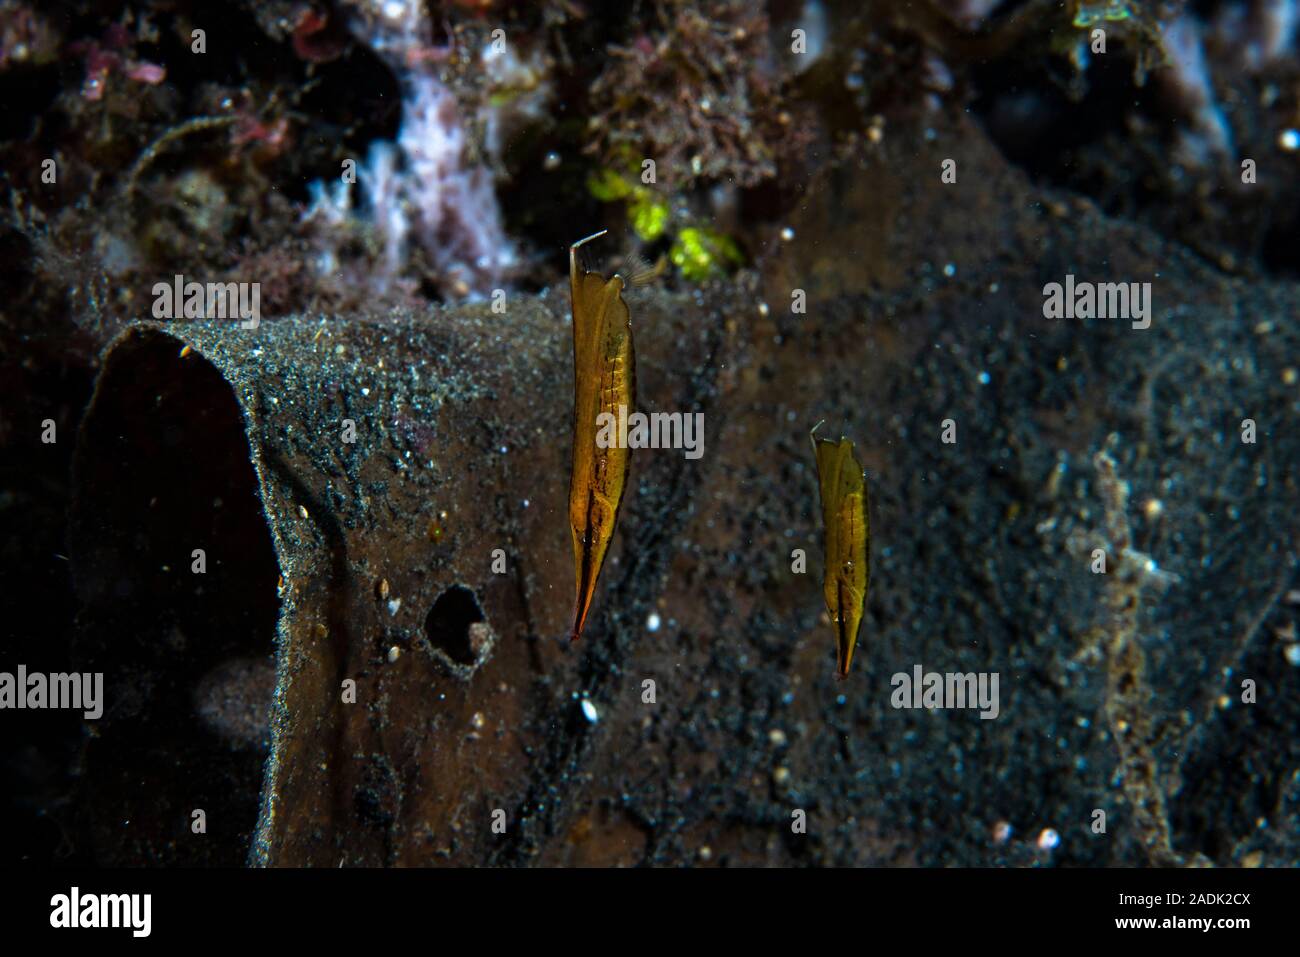 Underwater Photography Images Stock Photo